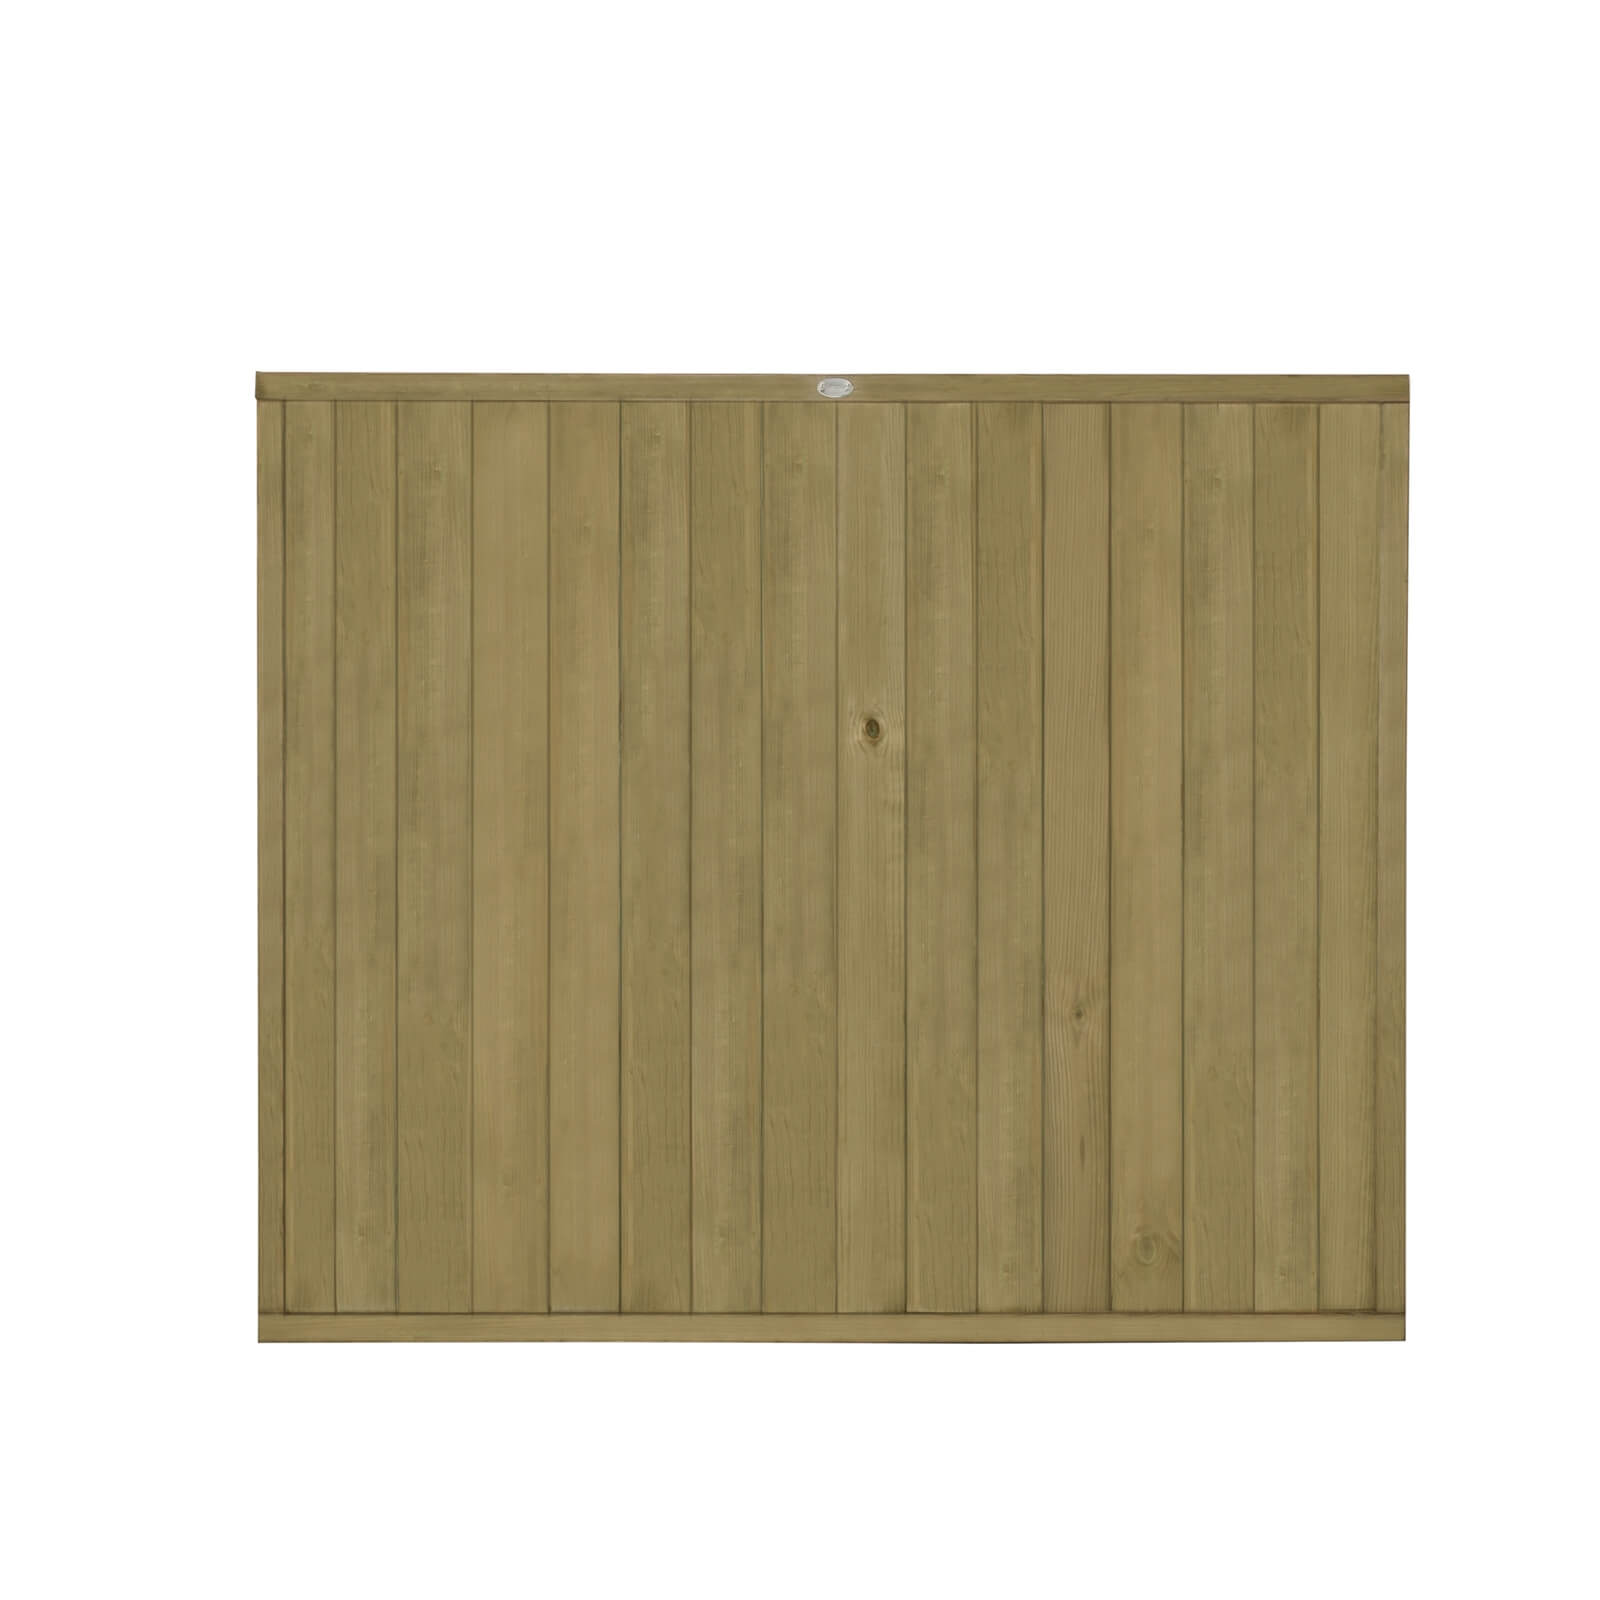 Forest Vertical Tongue & Groove Fence Panel - 5ft - Pack of 3